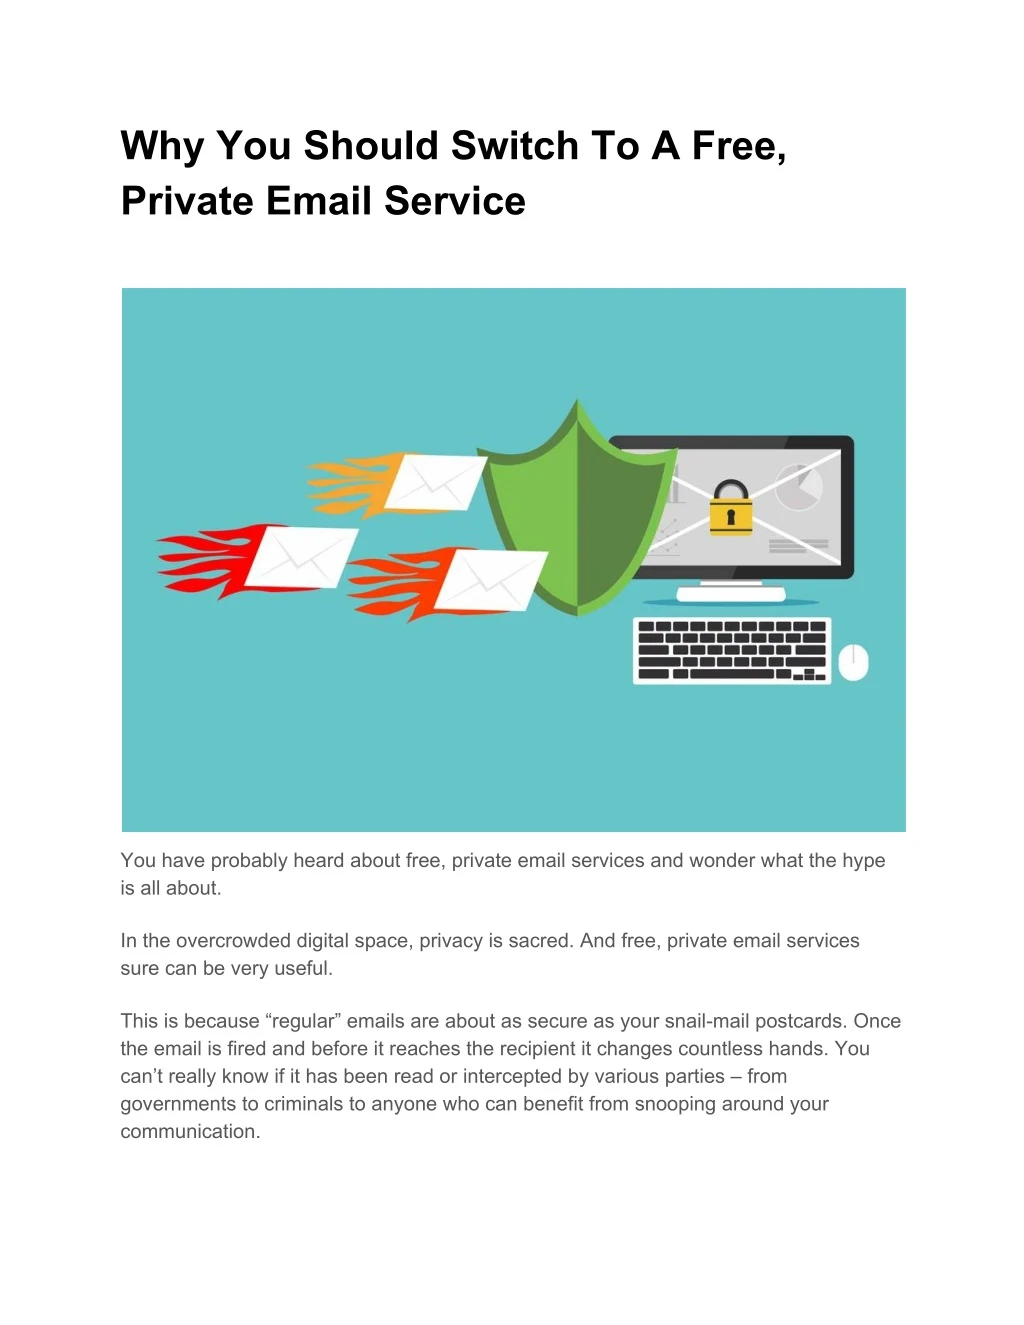 why you should switch to a free private email